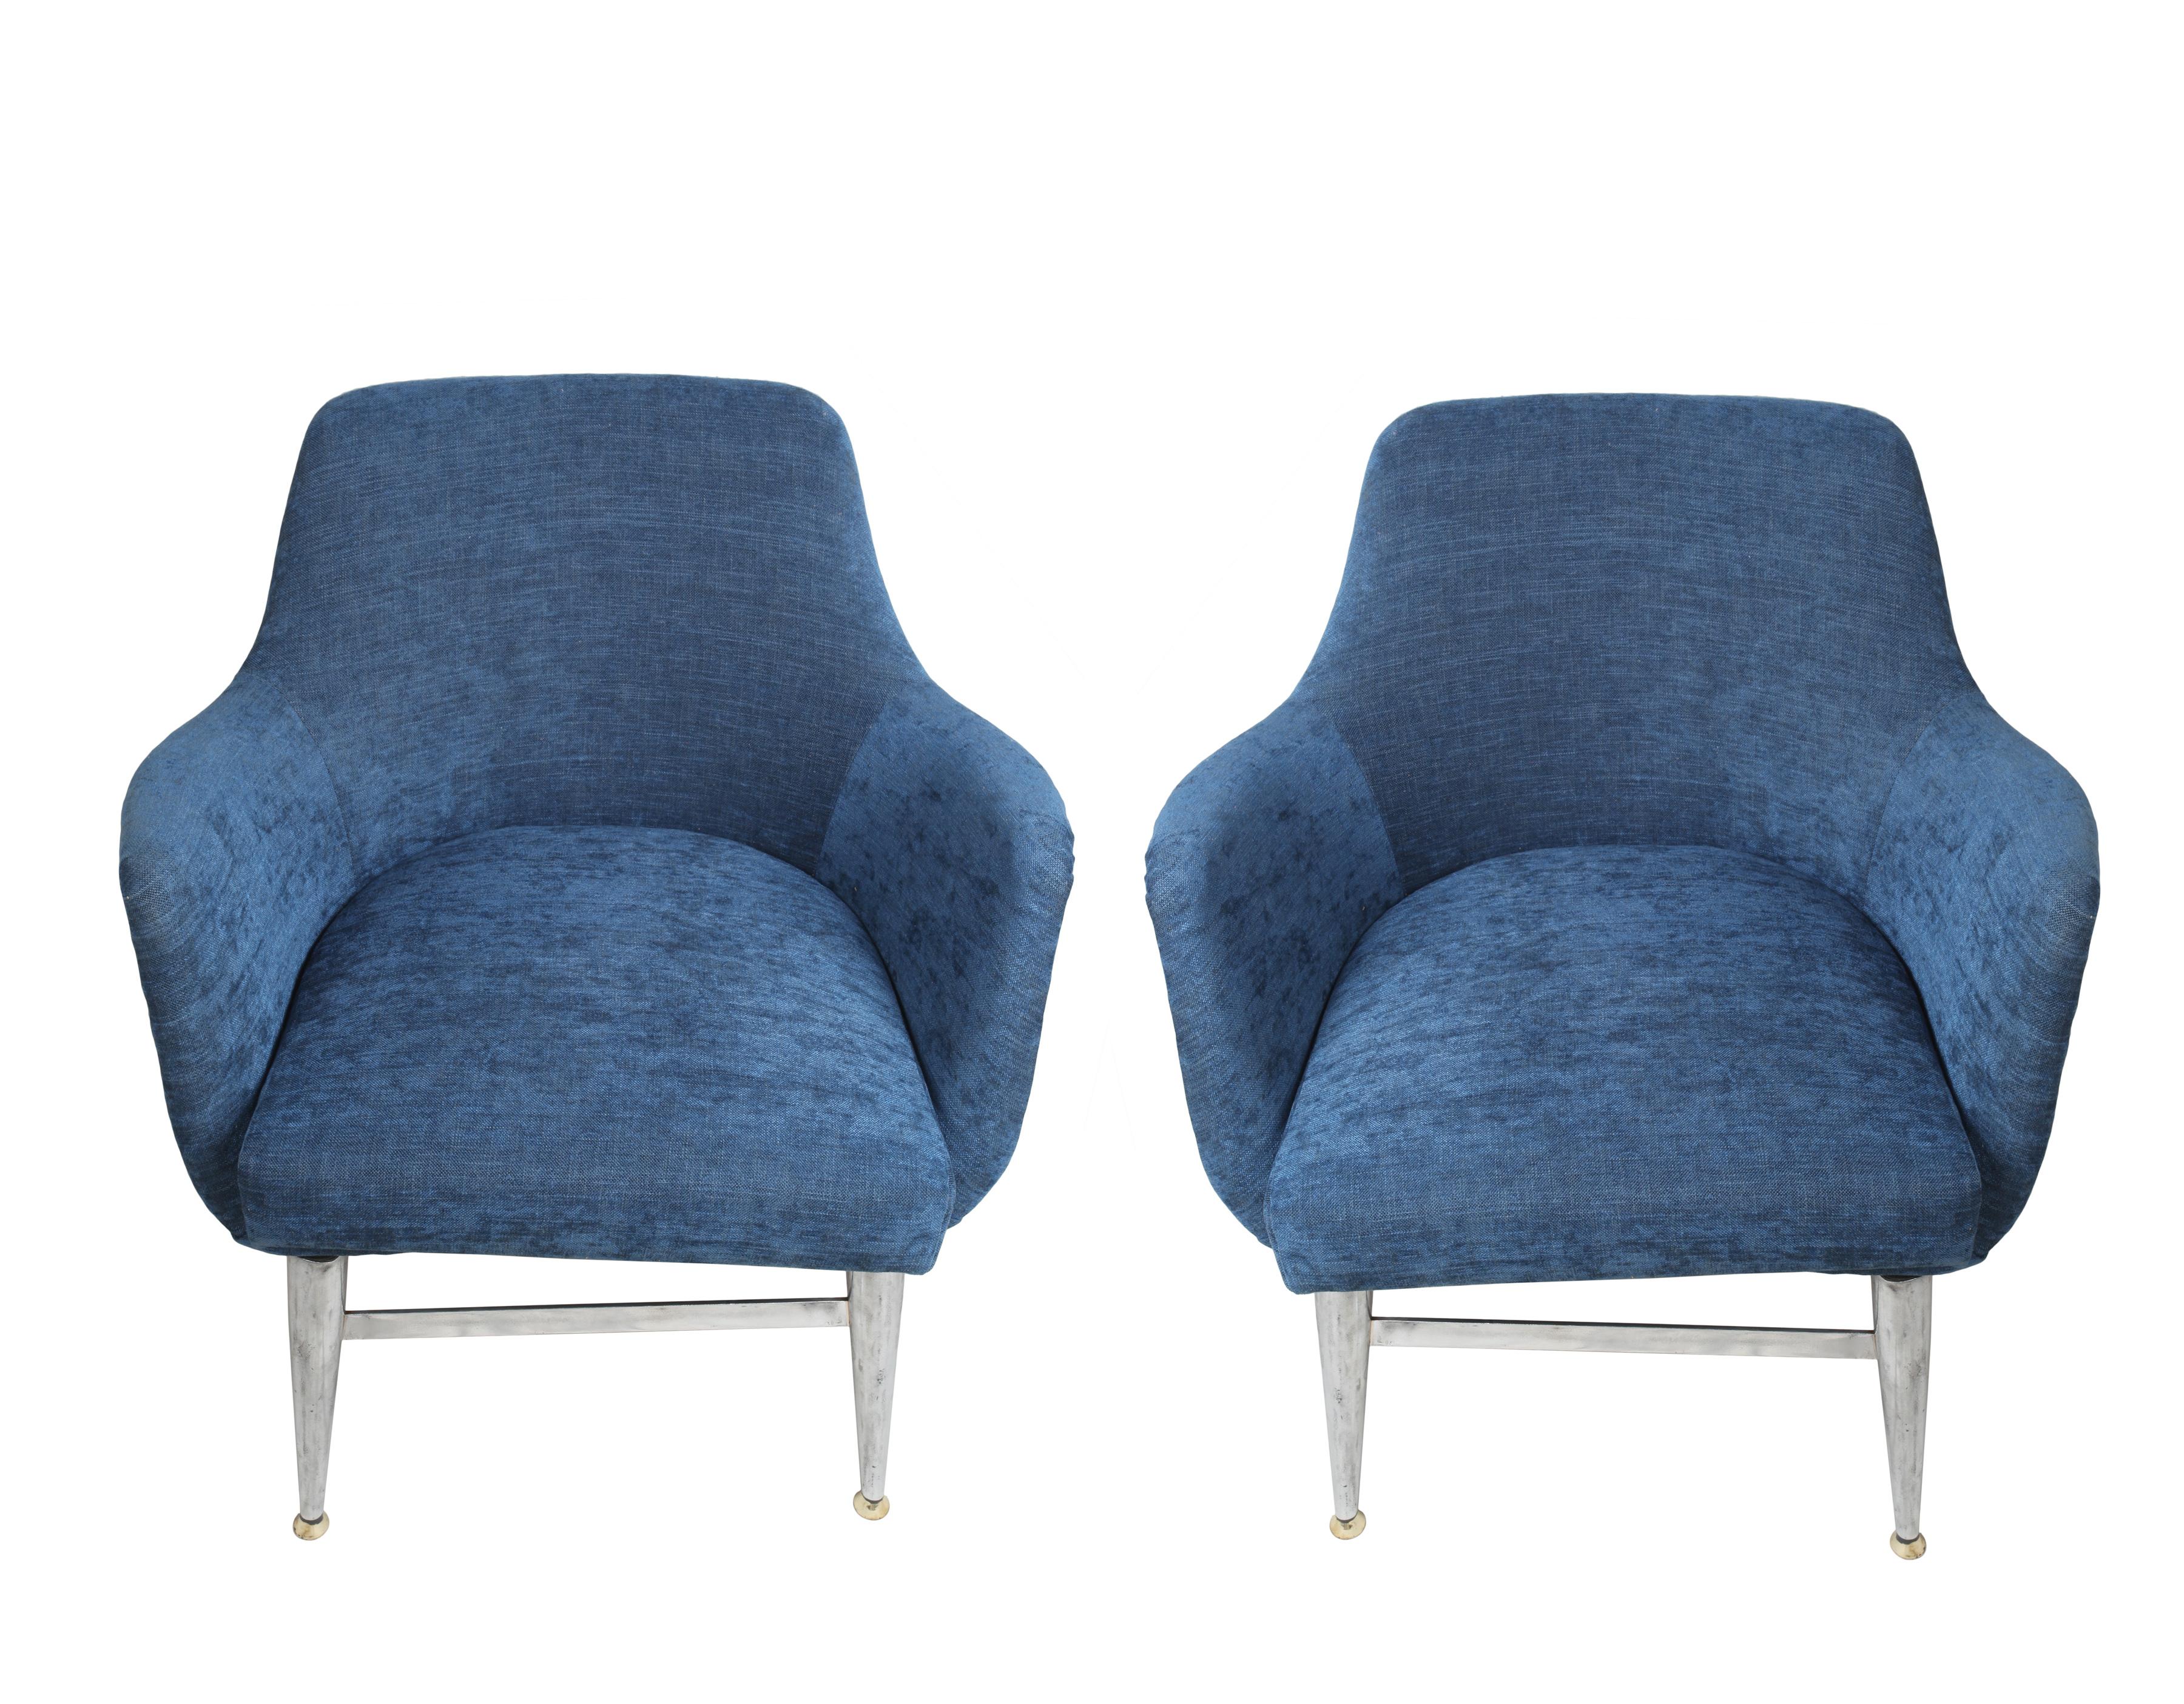 20th Century Mid-Century Modern Pair of Blue Chairs with Chrome Base and Legs